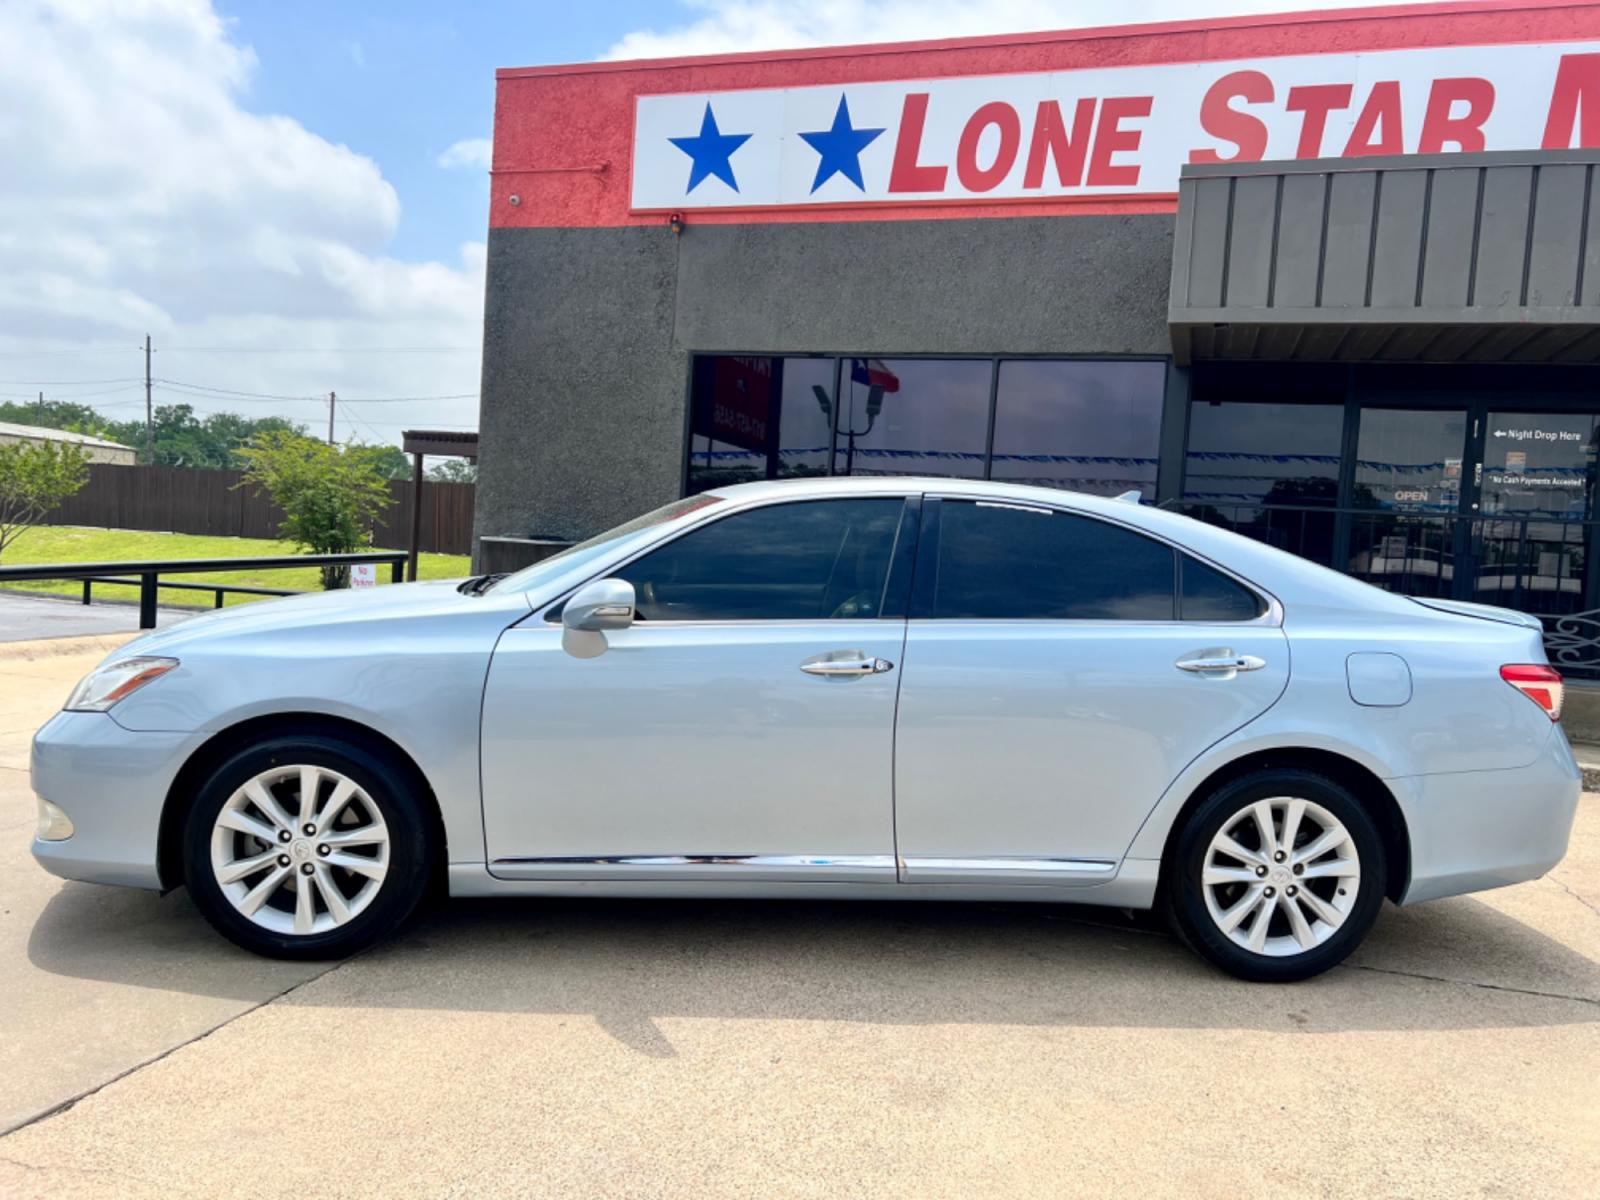 2010 BLUE /Tan LEXUS ES 350 BASE Base 4dr Sedan (JTHBK1EG3A2) with an 3.5L V6 engine, Automatic 6-Speed transmission, located at 5900 E. Lancaster Ave., Fort Worth, TX, 76112, (817) 457-5456, 0.000000, 0.000000 - Cash CASH CAR ONLY, NO FINANCING AVAILABLE. THIS 2010 LEXUS ES 350 BASE 4 DOOR SEDAN RUNS AND DRIVES GREAT. IT IS EQUIPPED WITH A CD PLAYER, AM/FM RADIO AND AN AUX PORT. THE TIRES ARE IN GOOD CONDITION AND STILL HAVE TREAD LEFT ON THEM. THIS CAR WILL NOT LAST SO ACT FAST! Call or text Fran - Photo #3